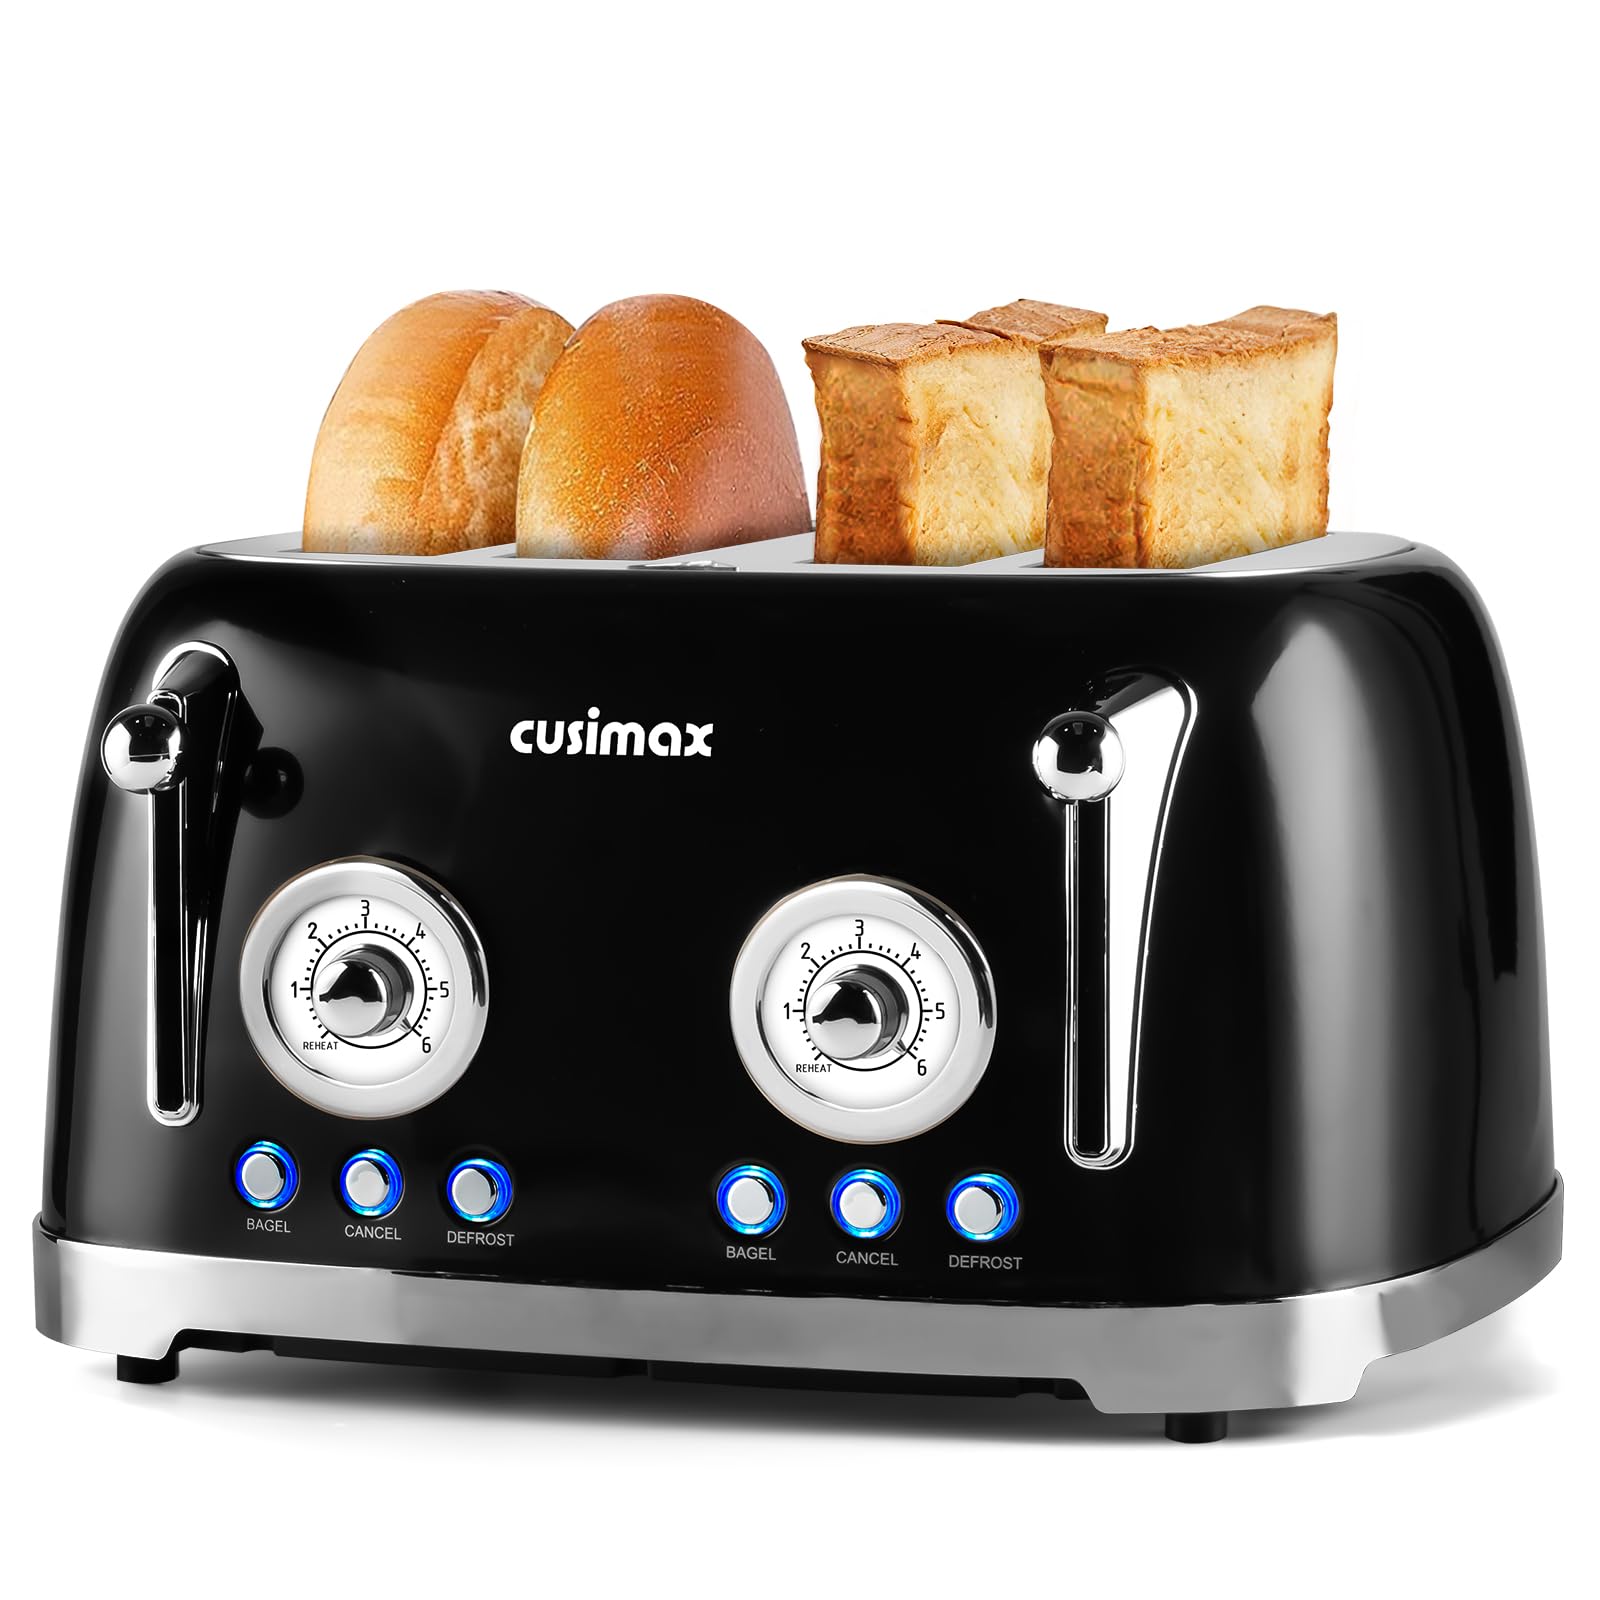 Cusimax Retro Toaster 4 Slice with Extra Wide Slots for Bagels and Waffles,6 Browning Levels and 4 Functions,Stainless Steel Toaster with Auto Shut-off and Cancel Button,Removable Crumb Tray